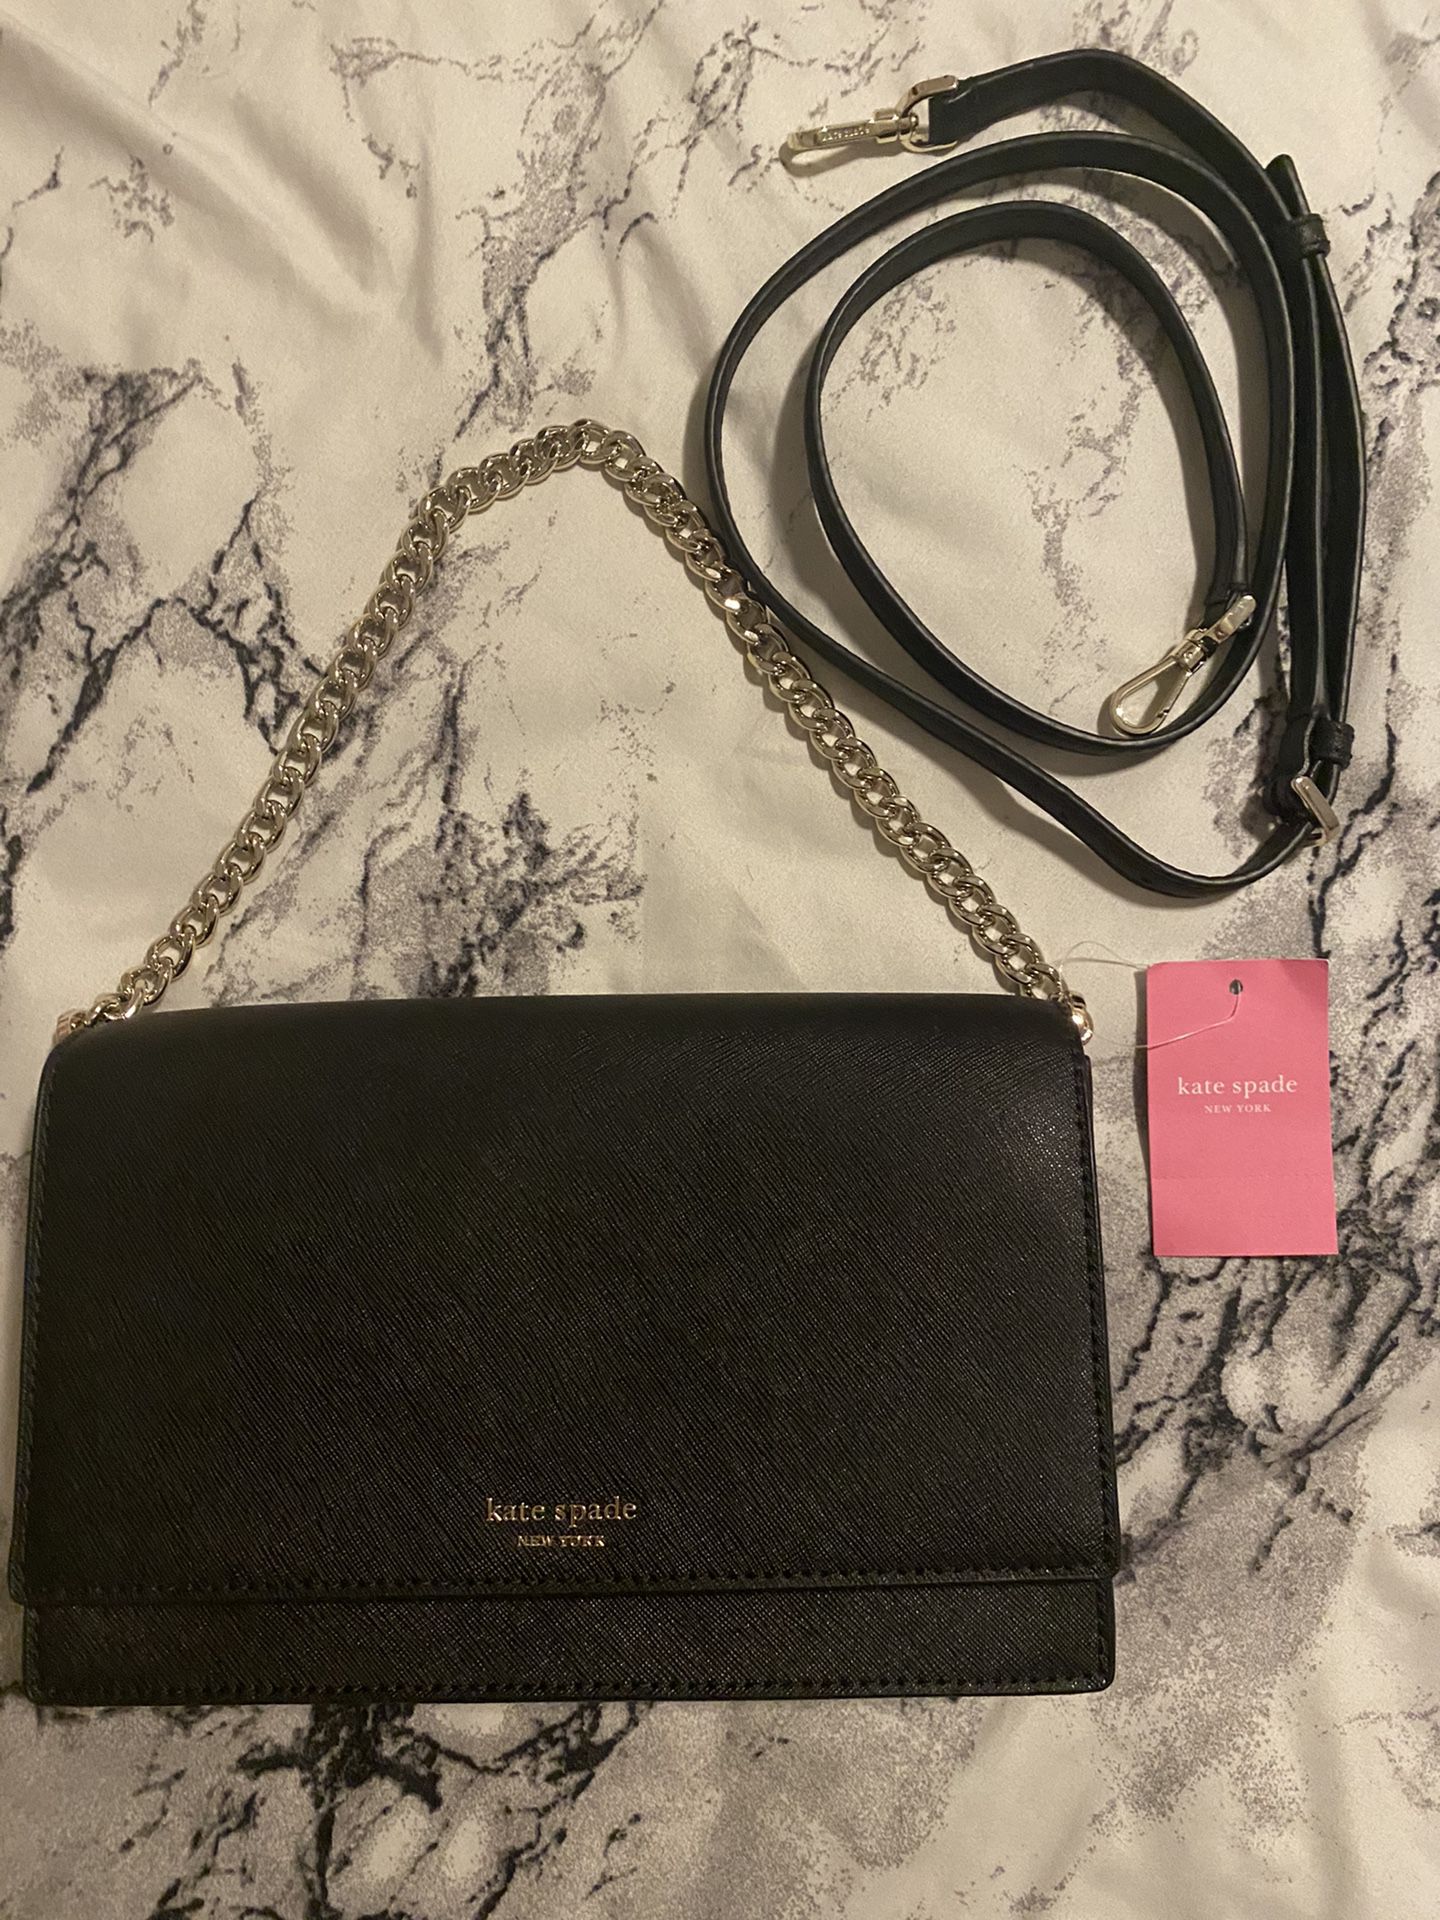 Black Kate spade cross body bag with chain